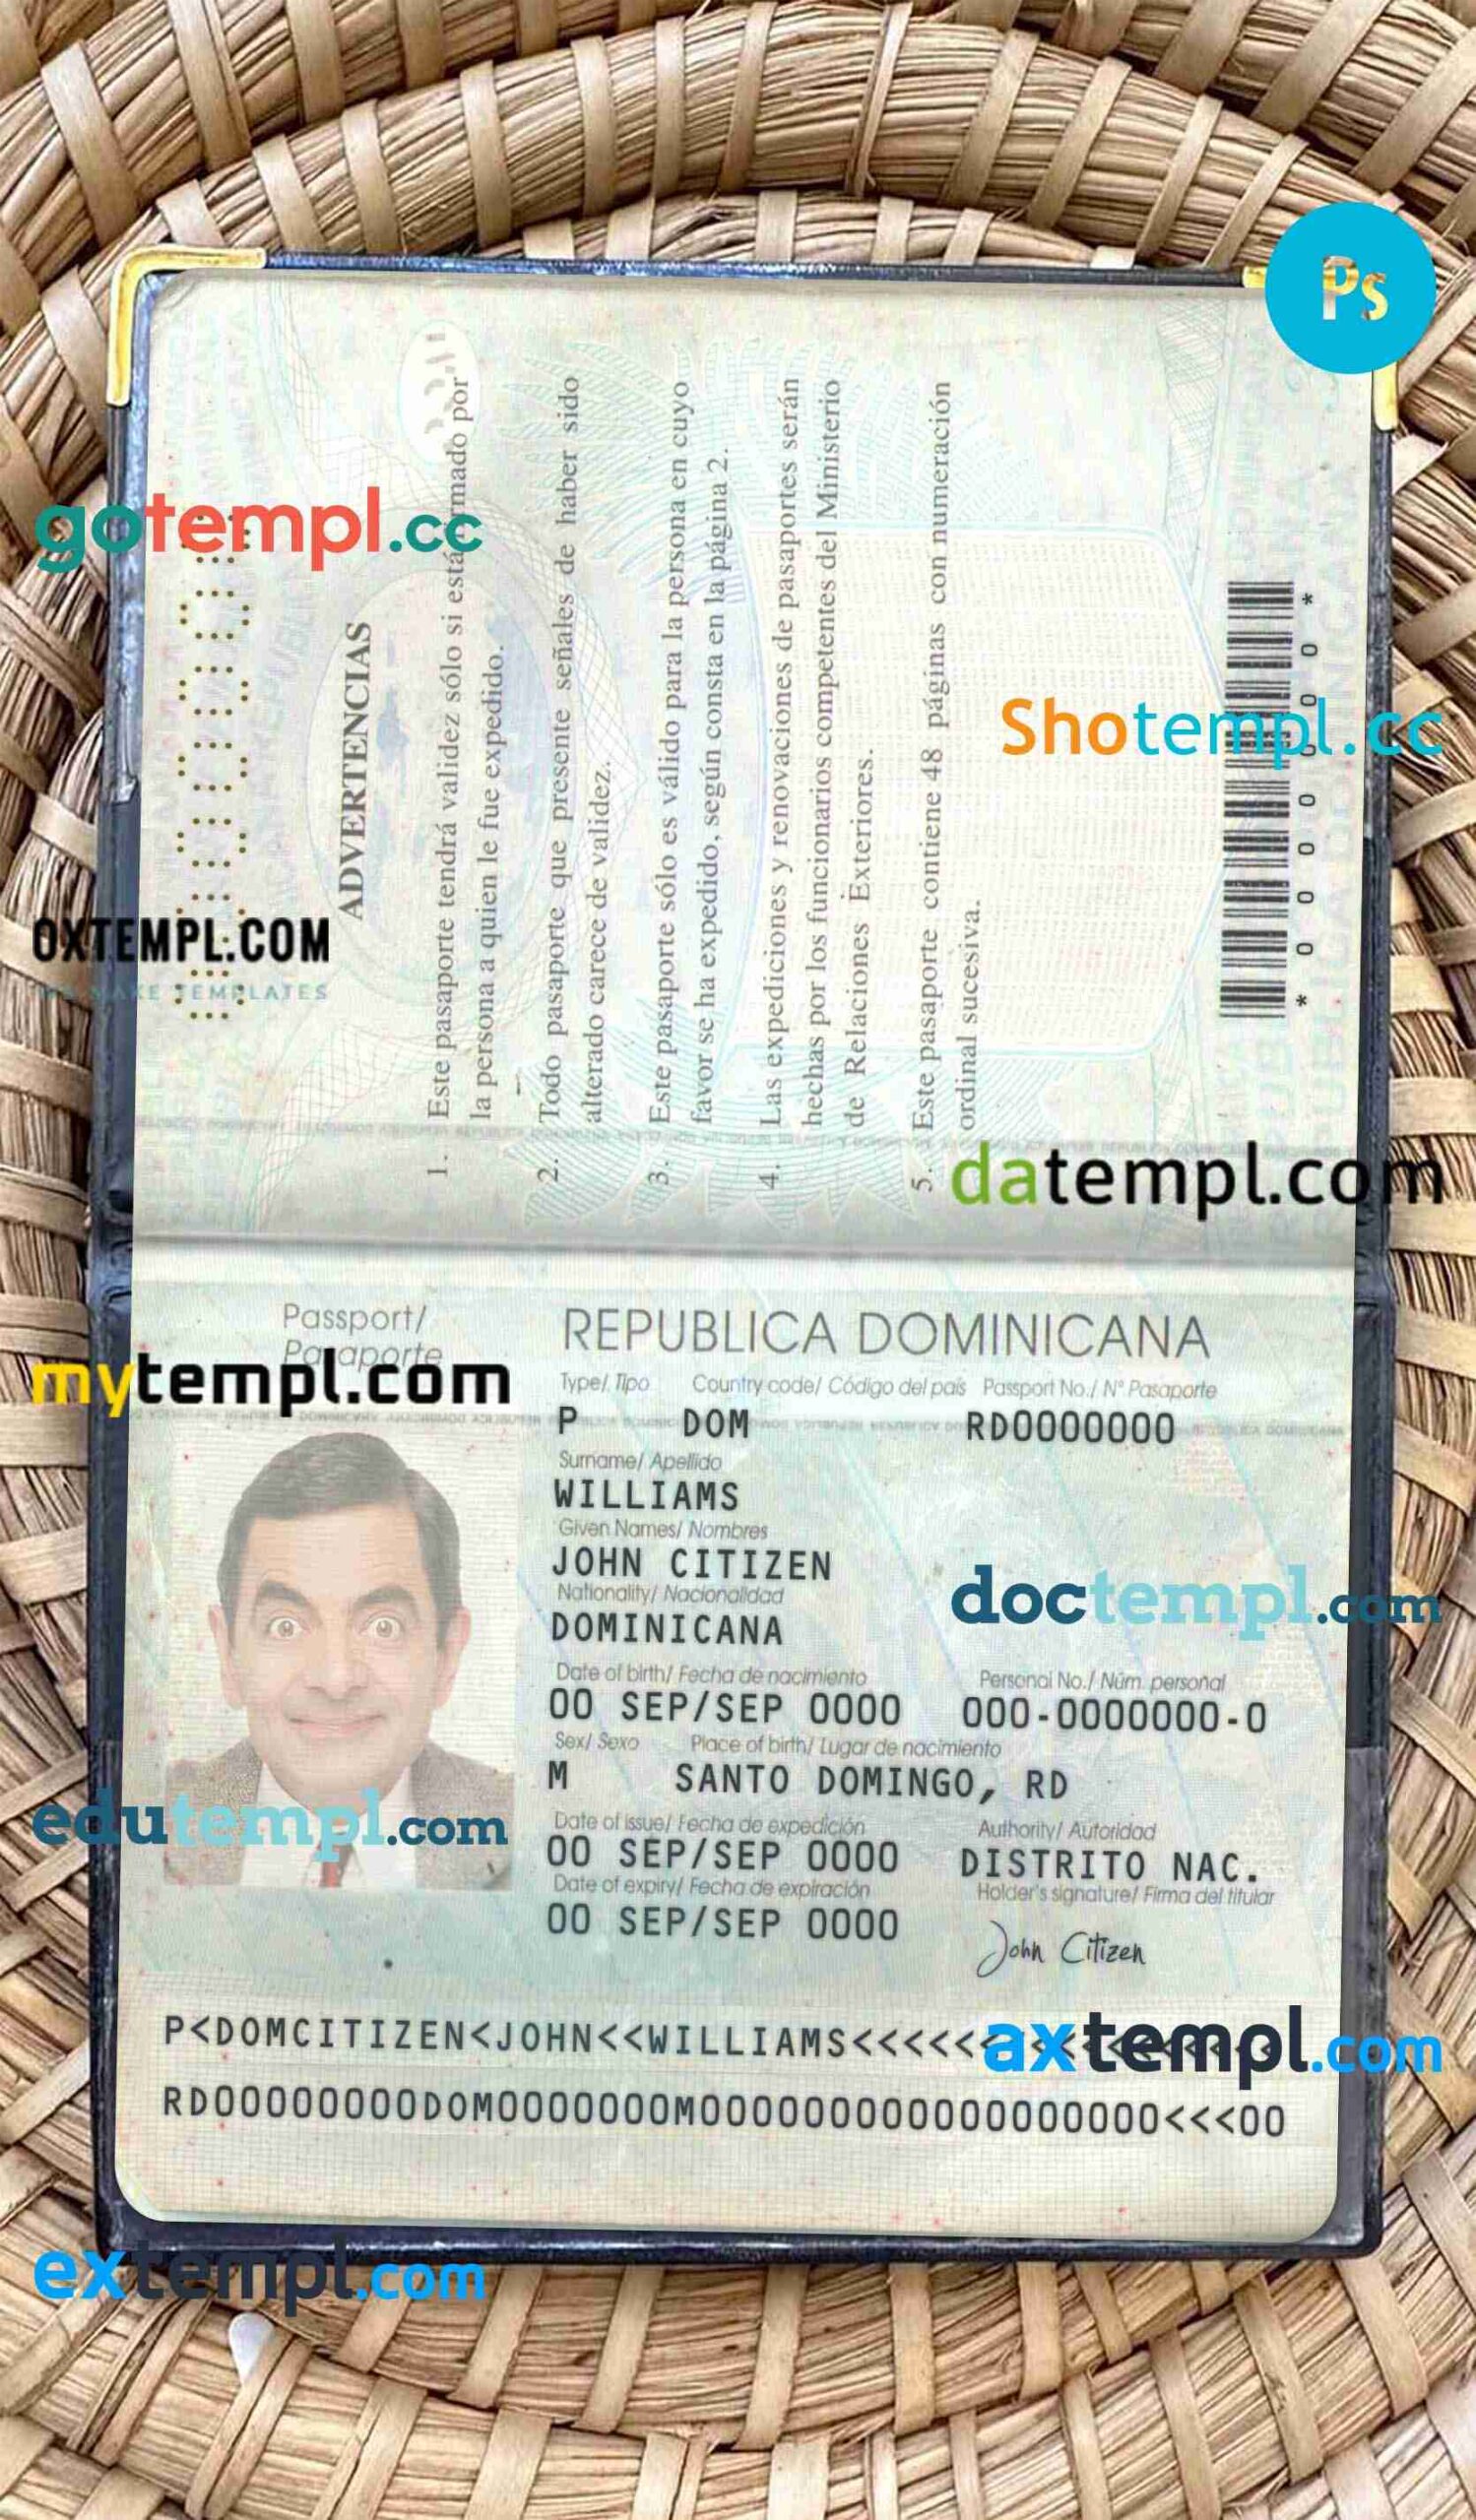 Pakistan passport PSD files, editable scan and photo-realistic look sample, 2 in 1